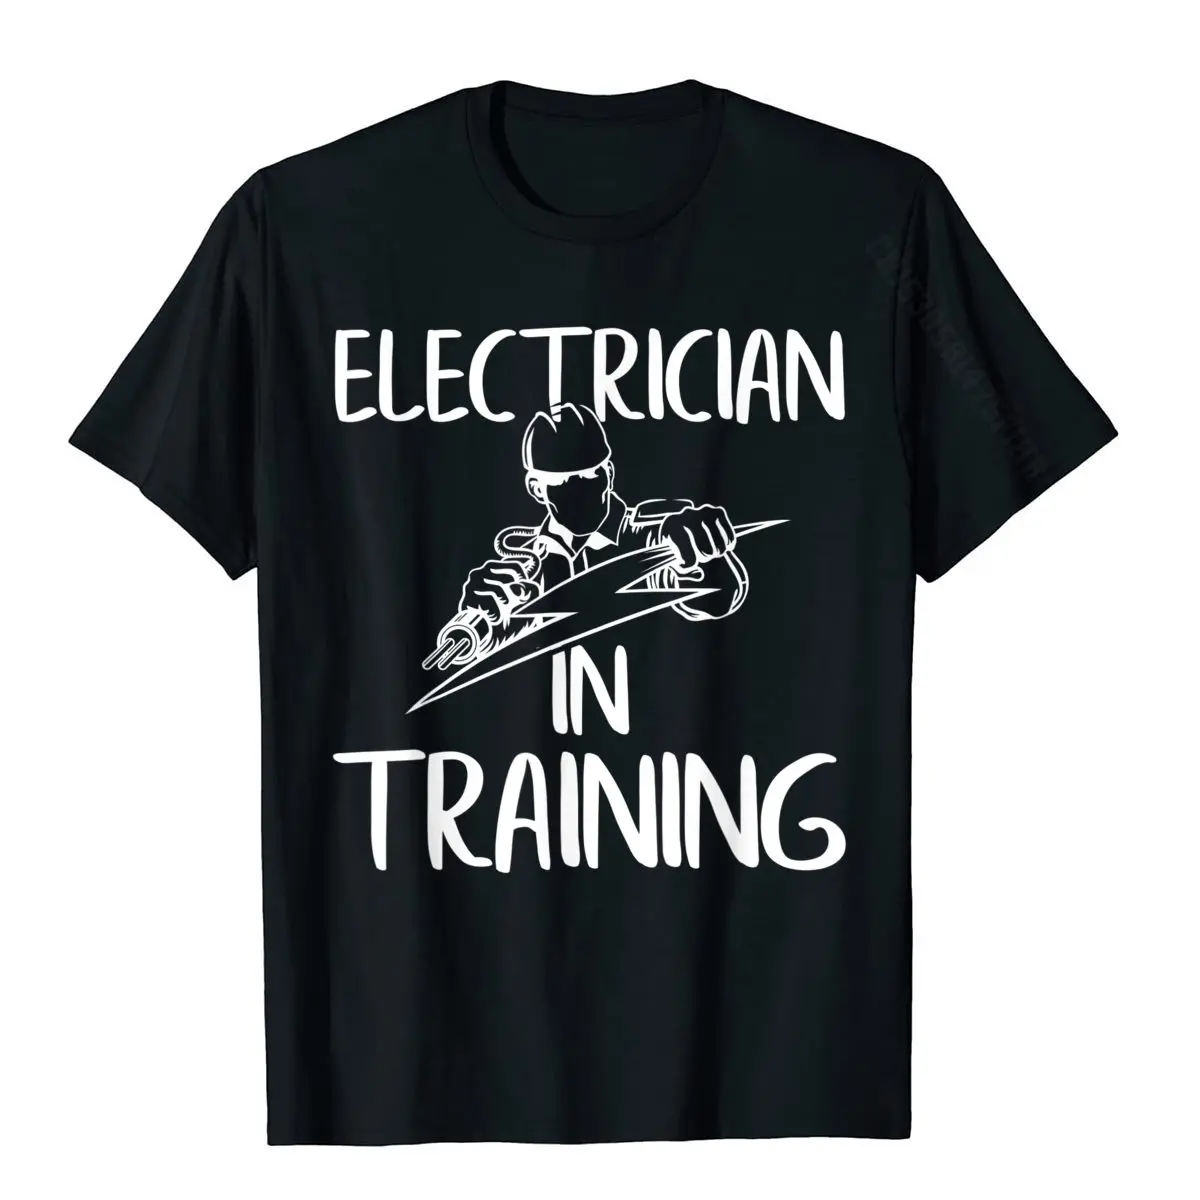 Electrician In Training Electrical Outfit Lineman Gift T-Shirt Cheap Men Top T-Shirts Cotton Tops & Tees Design